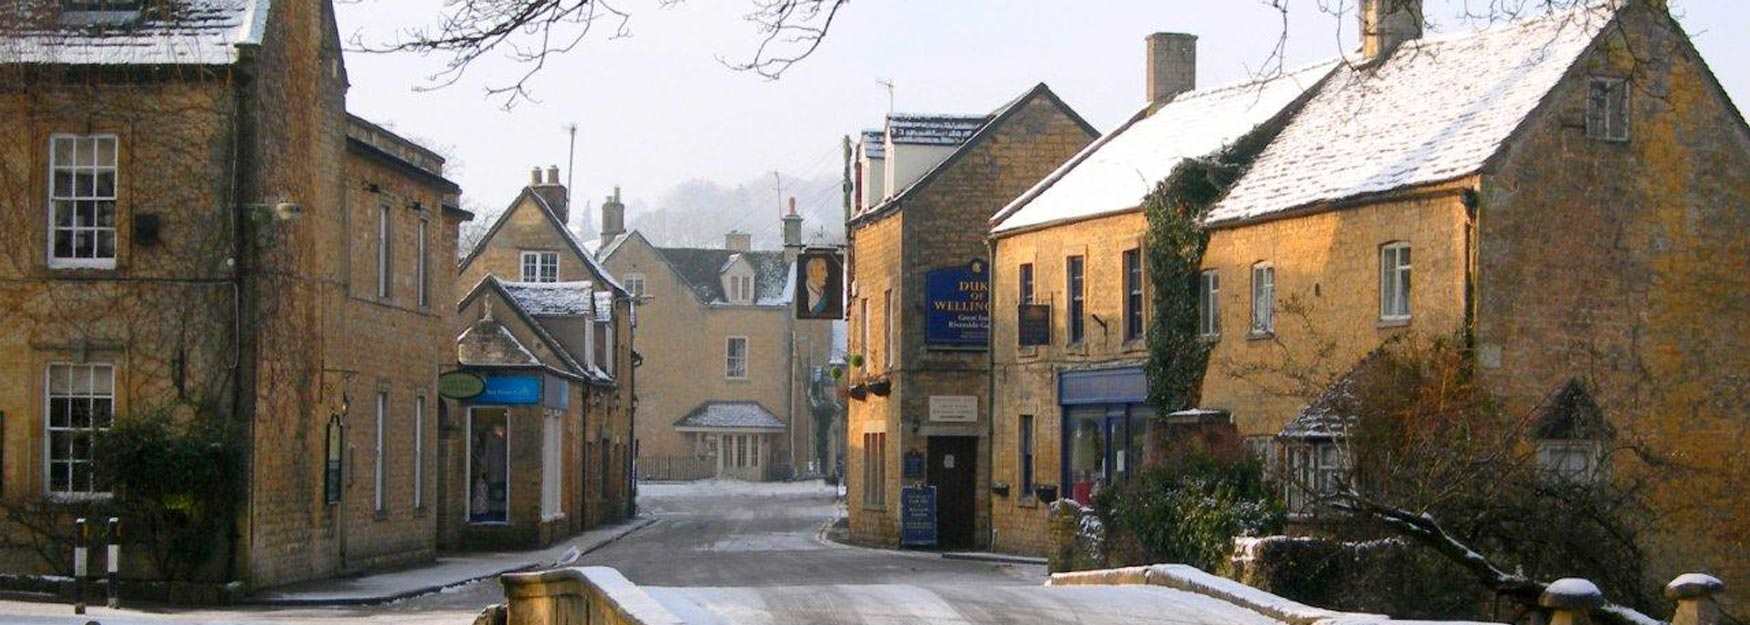 A wintery view of Bourton on the Water